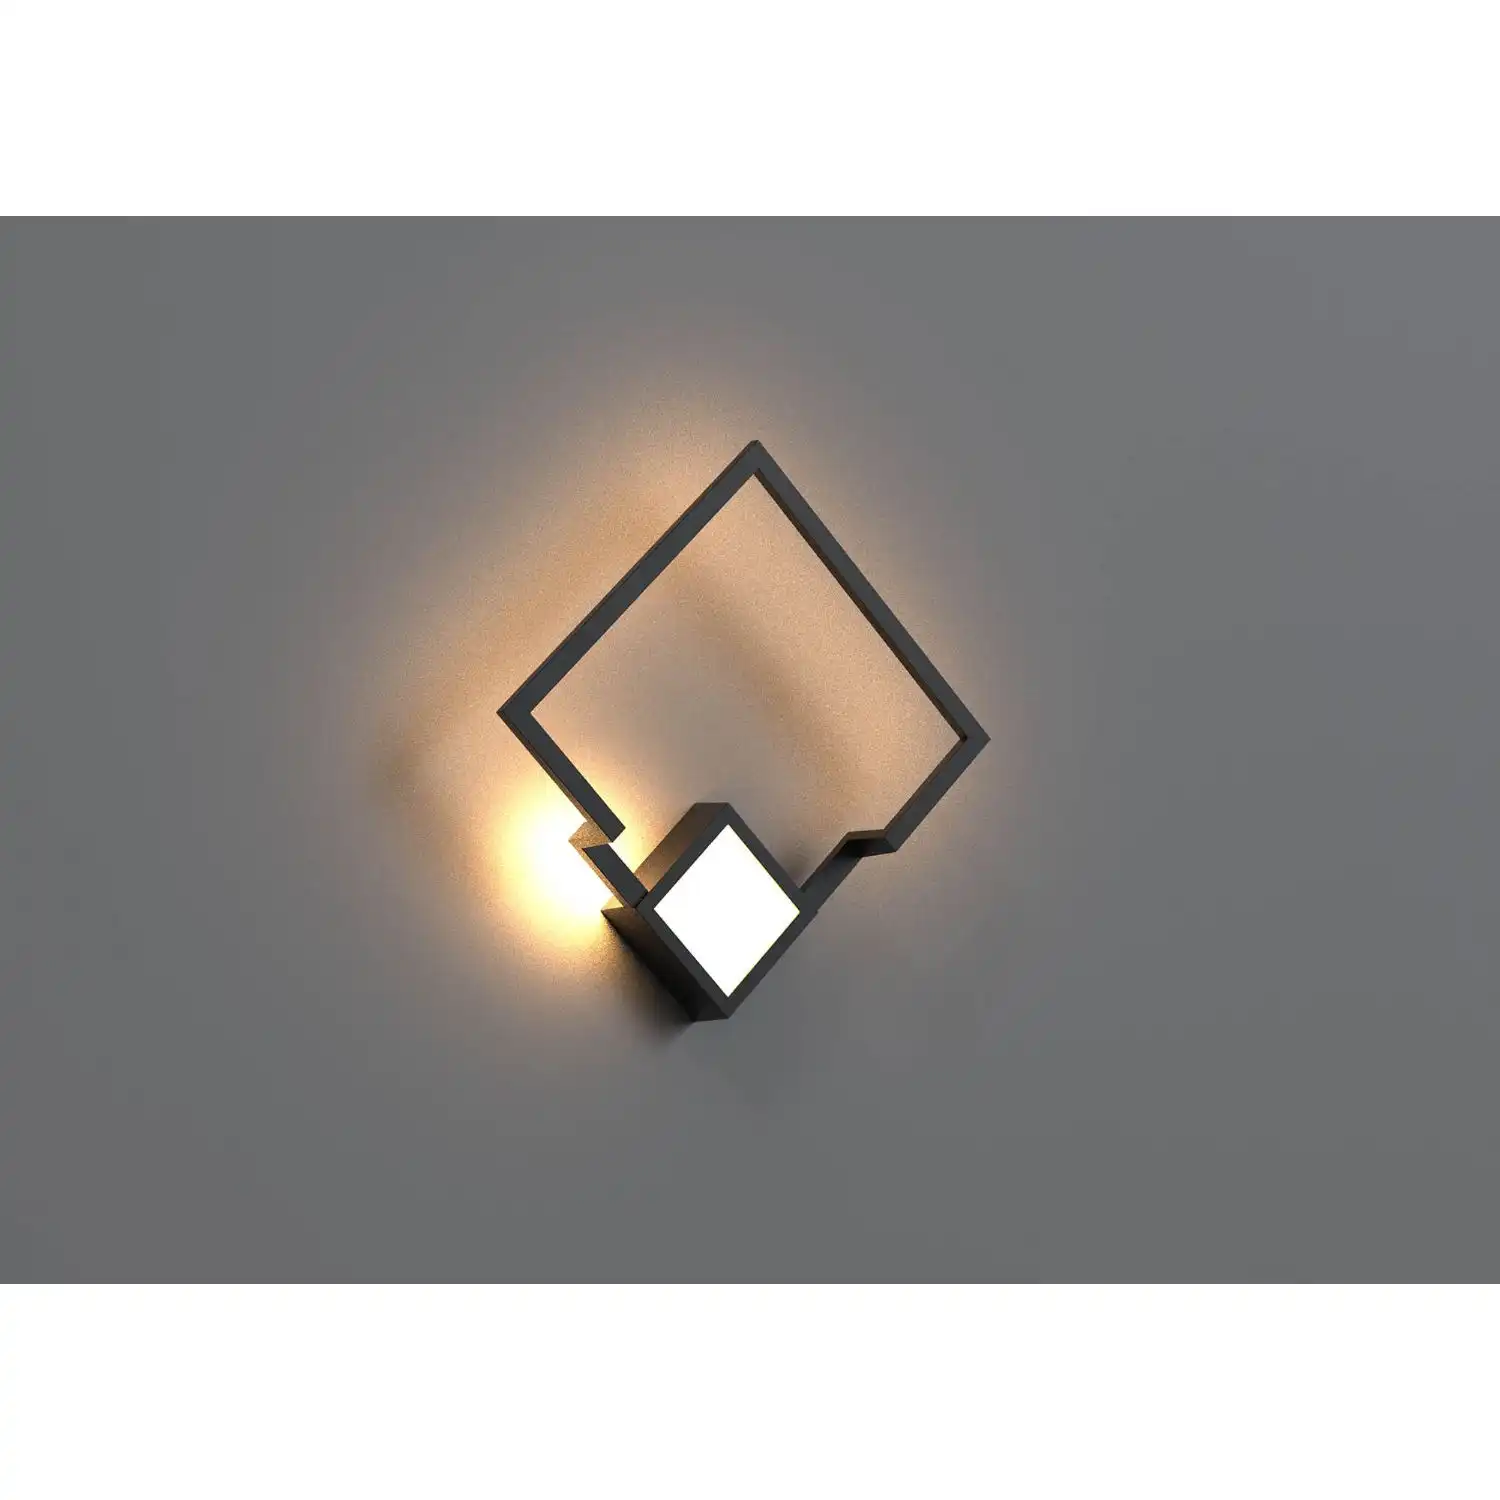 Boutique Square Wall Lamp, Dimmable, 18W LED, 3000K, 1150lm, Black, 3yrs Warranty